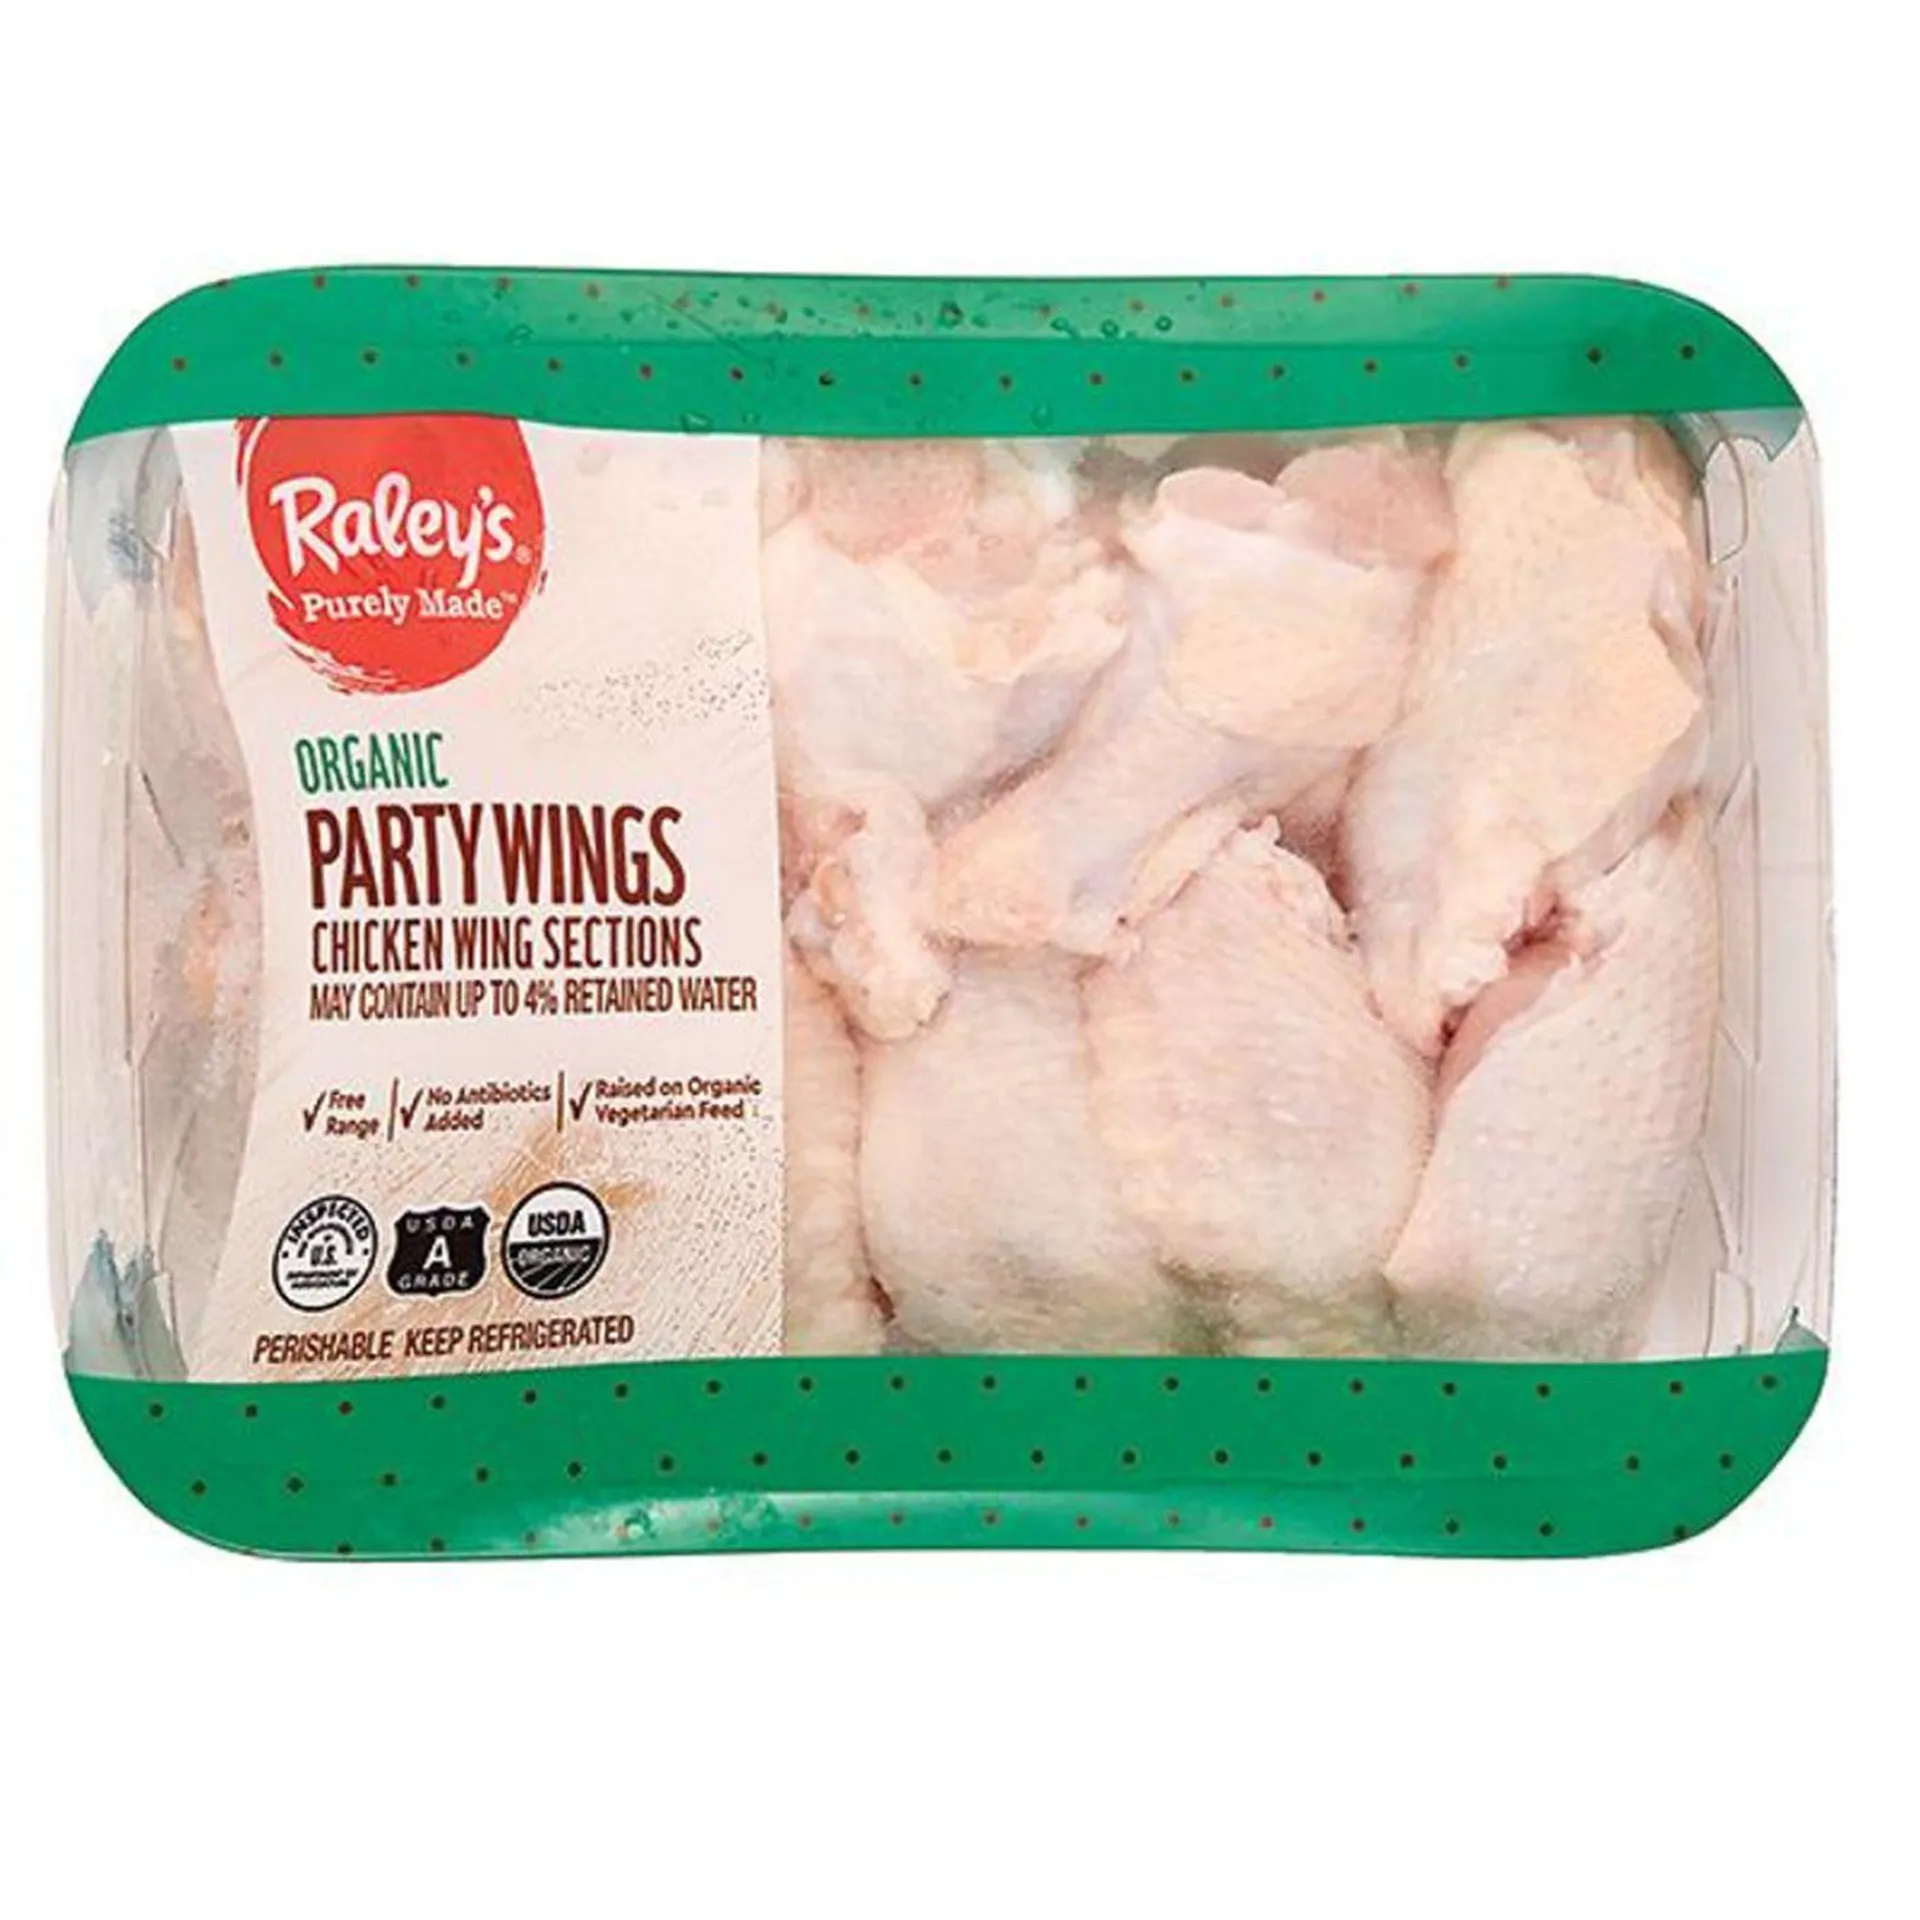 Raley's Purely Made Organic Chicken Party Wings